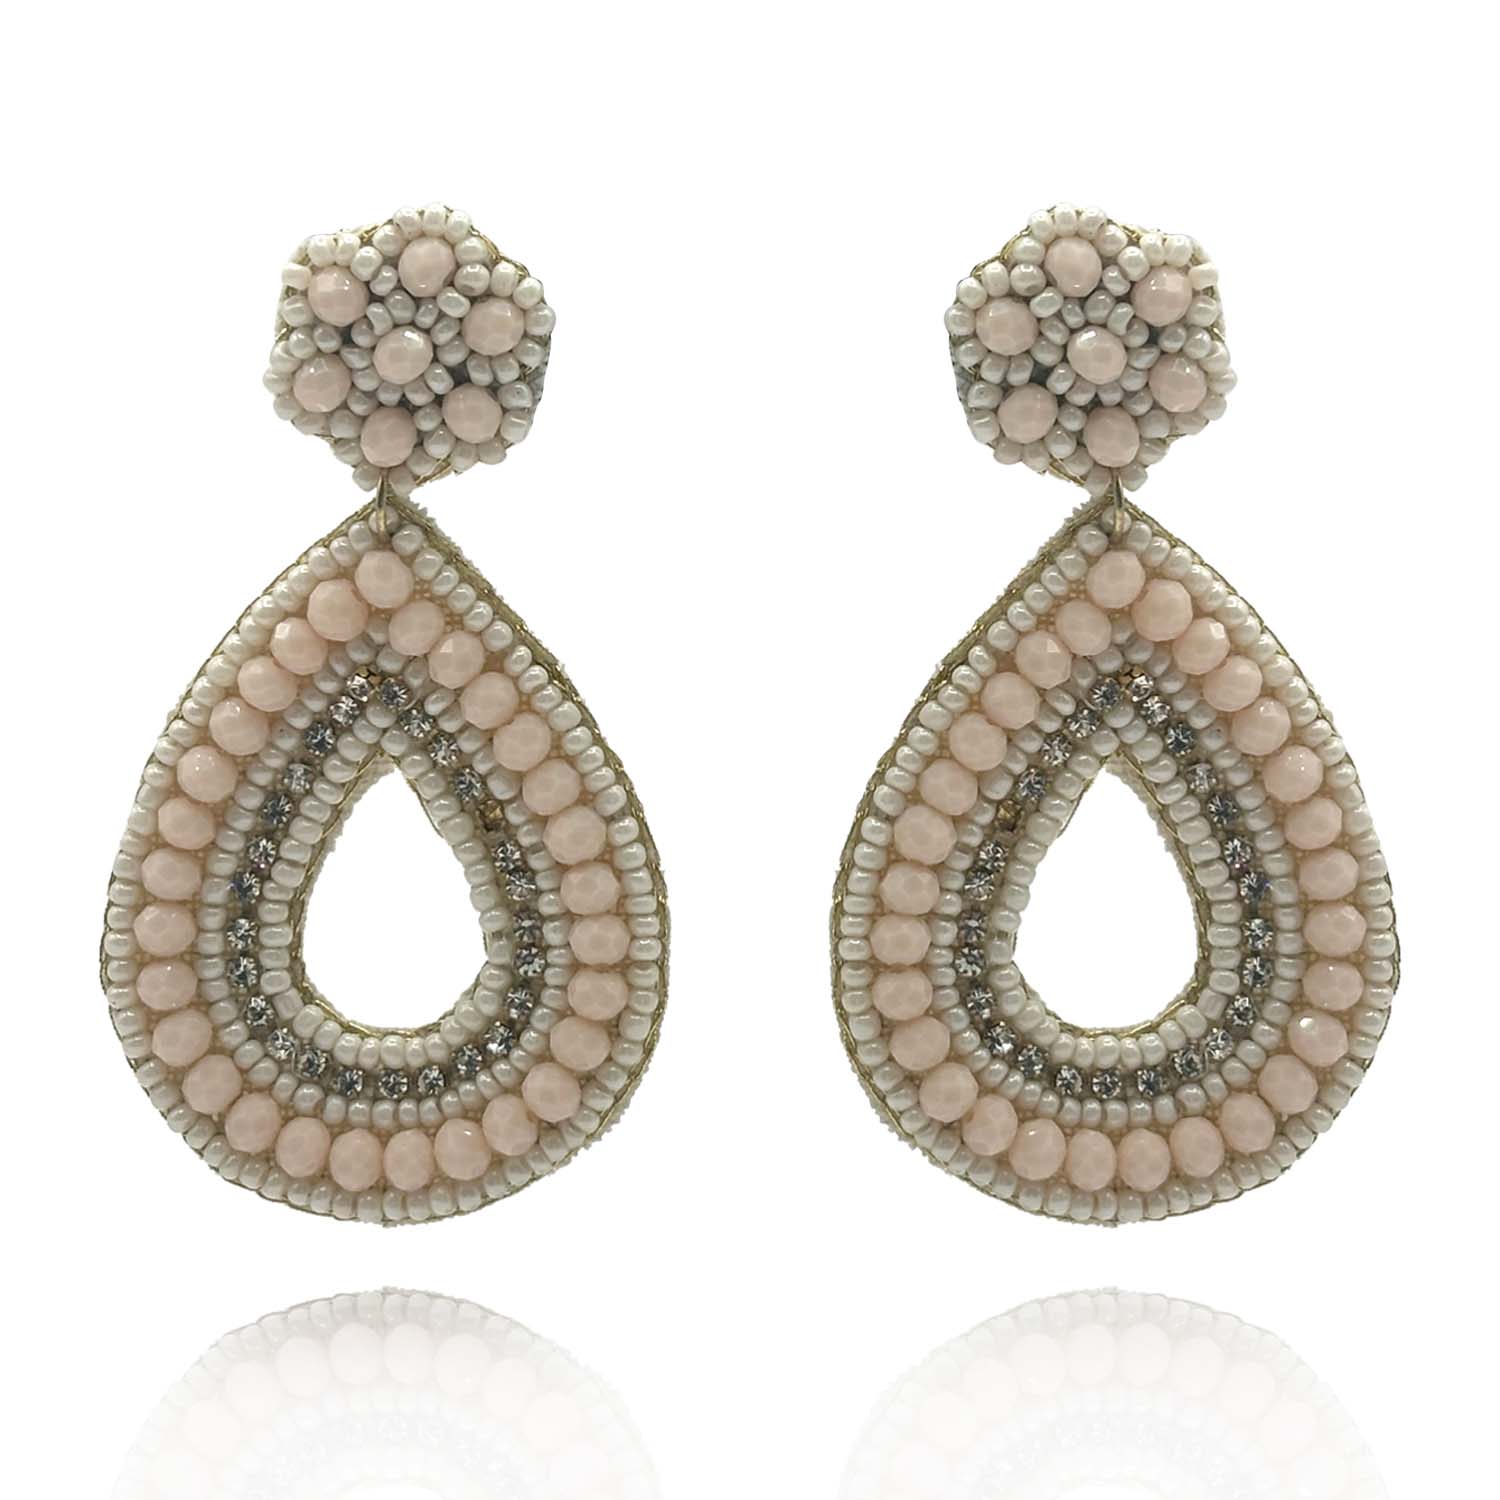 Michael Nash Jewelry Women's Neutrals Hand-beaded Ivory Earrings With Rhinestone Accents In Gray